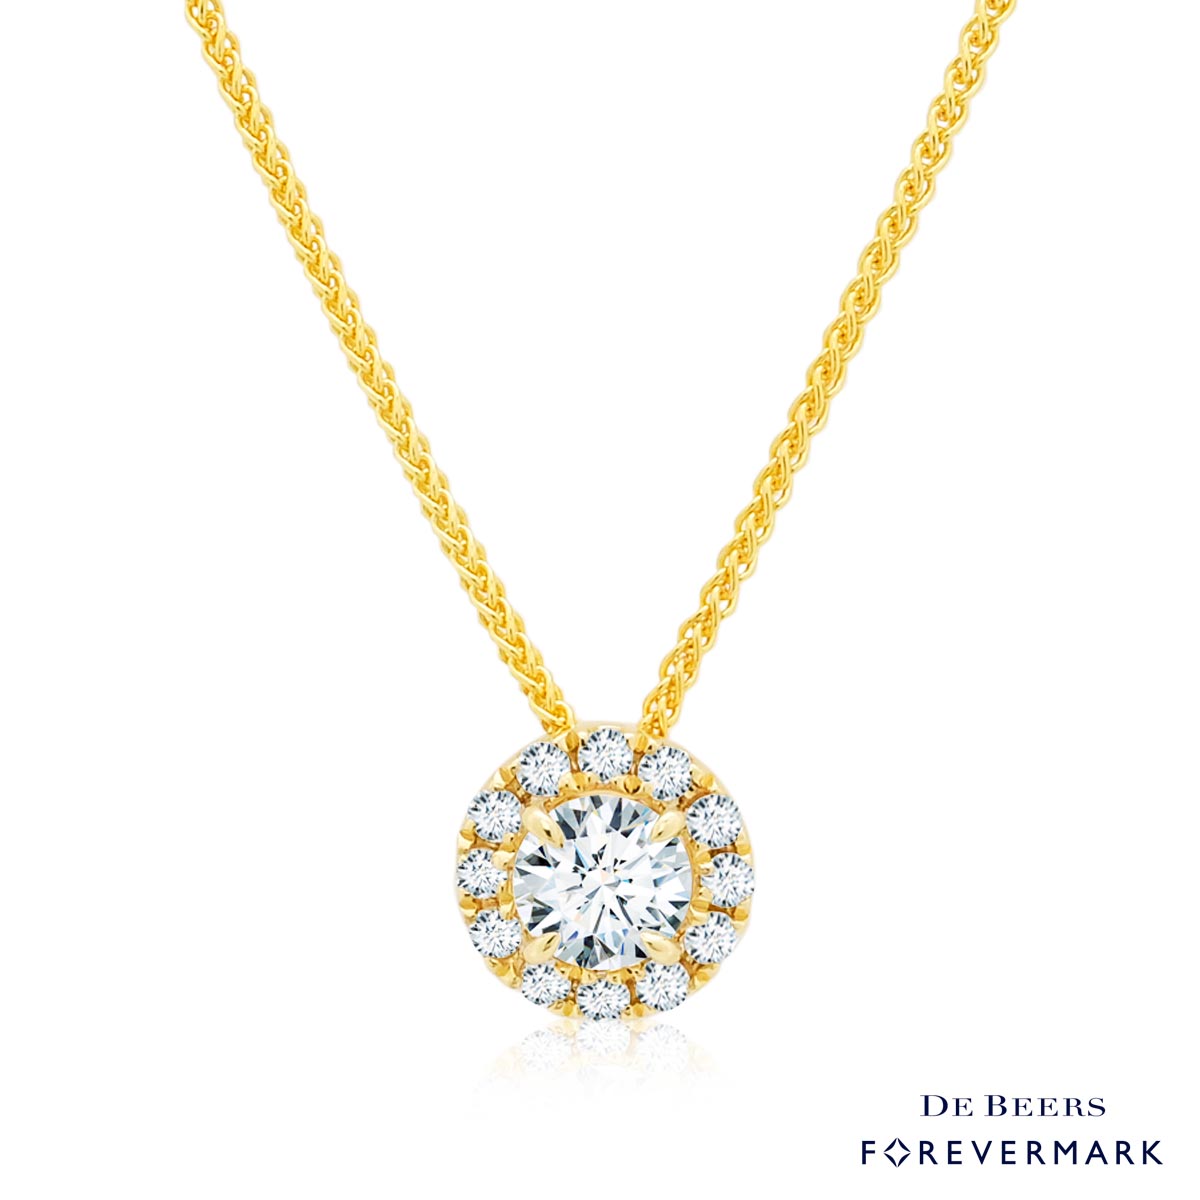 De Beers Forevermark Center of My Universe Diamond Necklace in 18kt Yellow Gold (1/3ct tw)